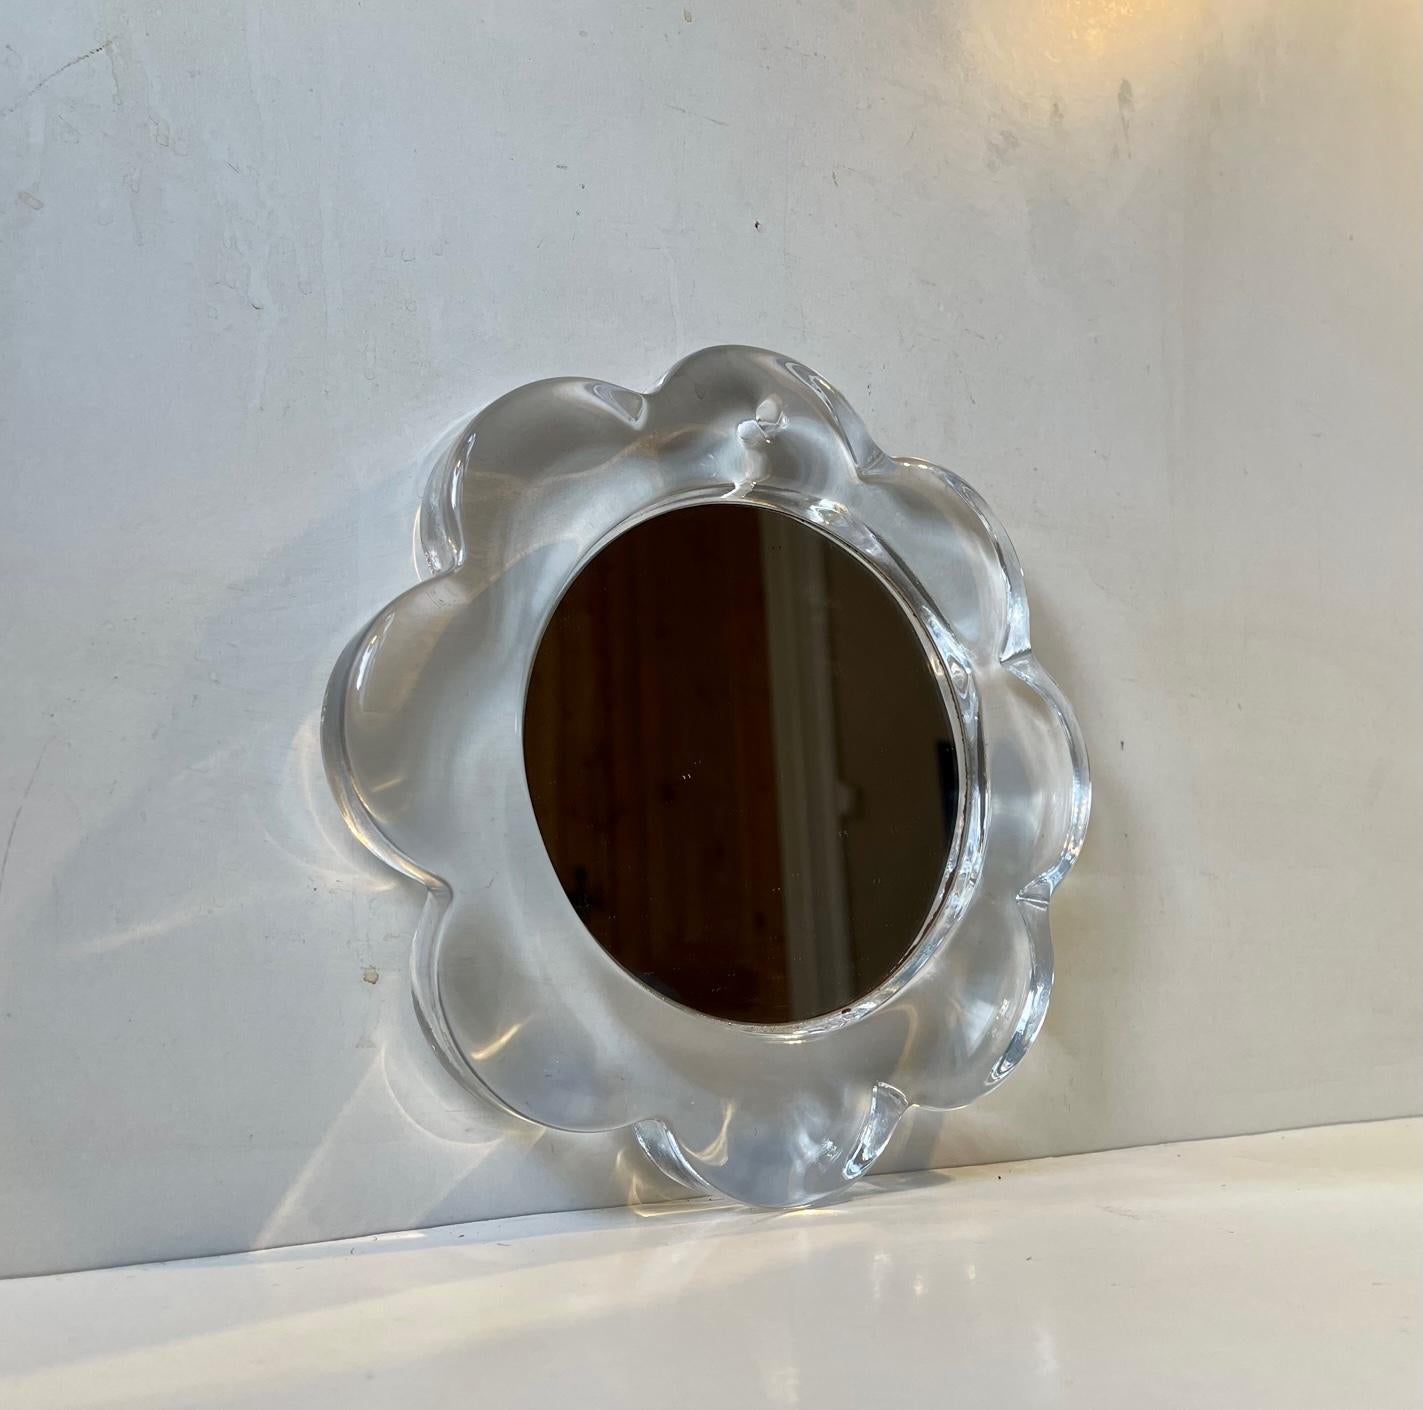 A rare small vanity type wall mirror for make-up, hair-adjustments or Decorative purposes. It is executed in thick hand-thrown art glass. Designed and made at Pukeberg in Sweden circa 1970. Measurements: 22x22 cm, Dept: 2.5 cm.